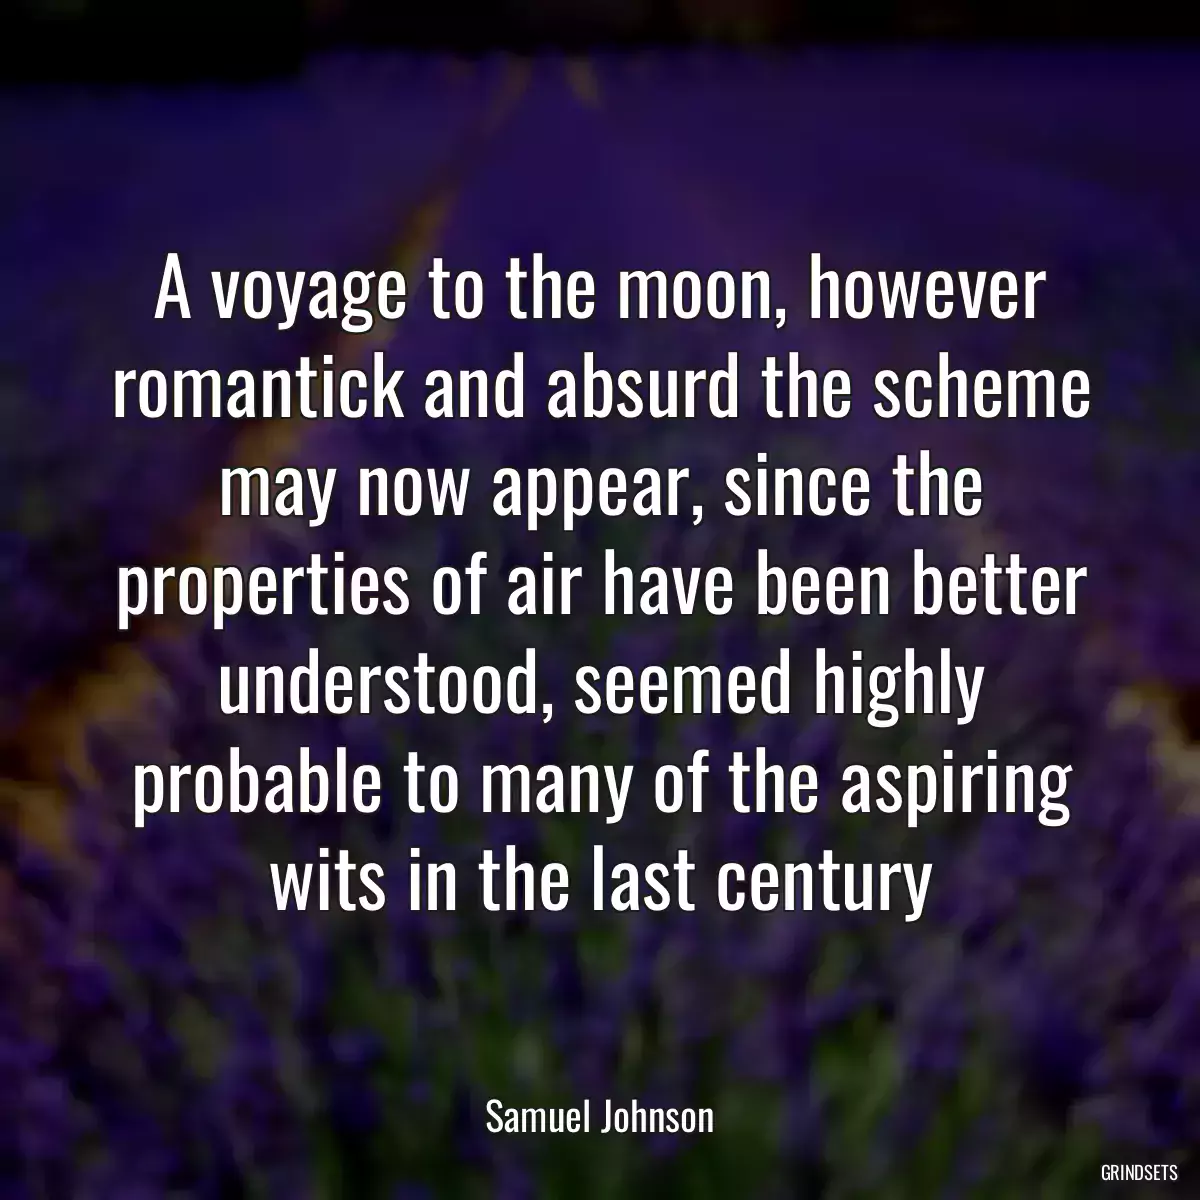 A voyage to the moon, however romantick and absurd the scheme may now appear, since the properties of air have been better understood, seemed highly probable to many of the aspiring wits in the last century